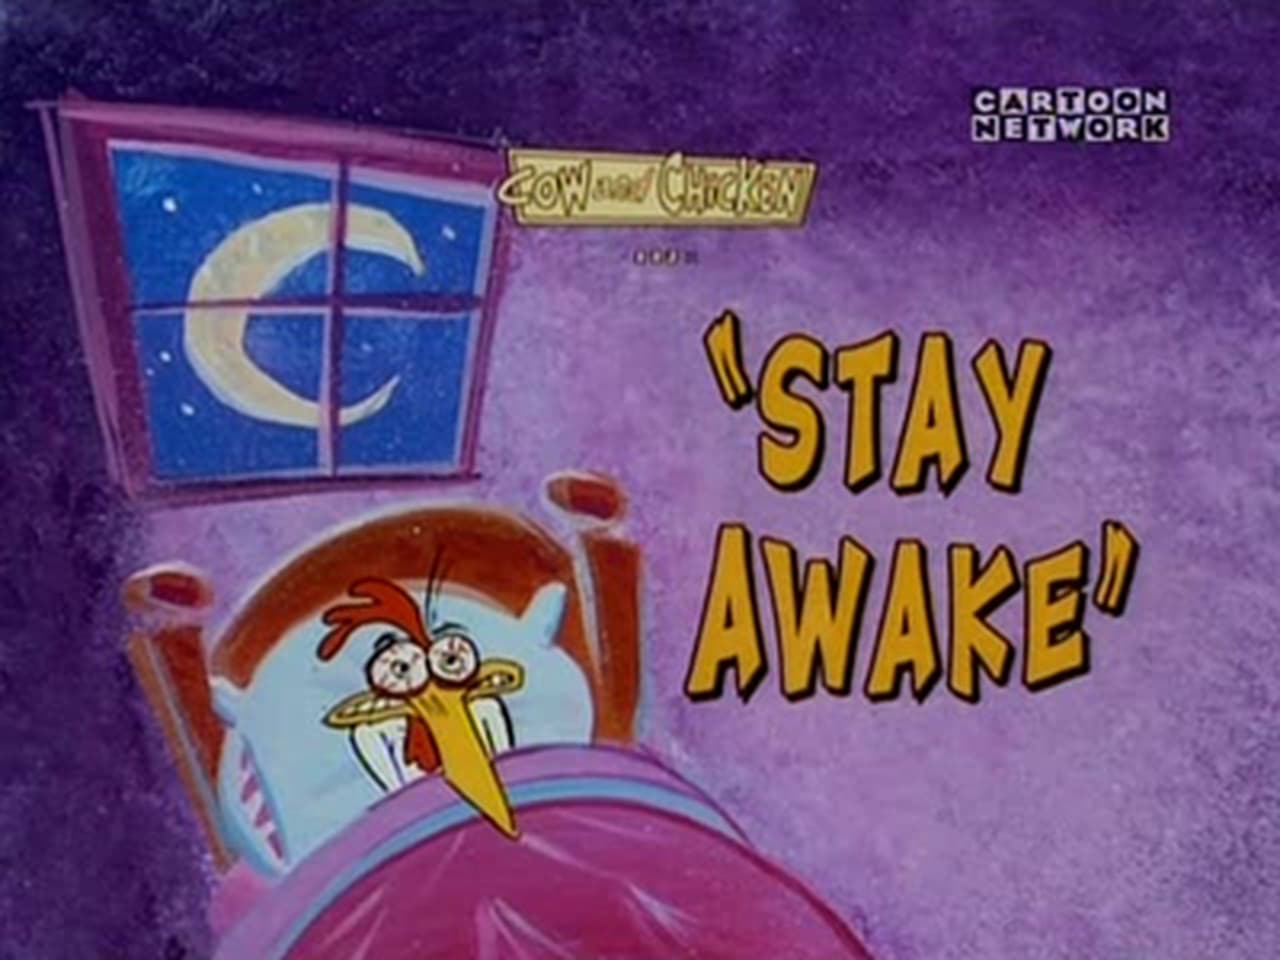 Cow and Chicken - Season 2 Episode 26 : Stay Awake